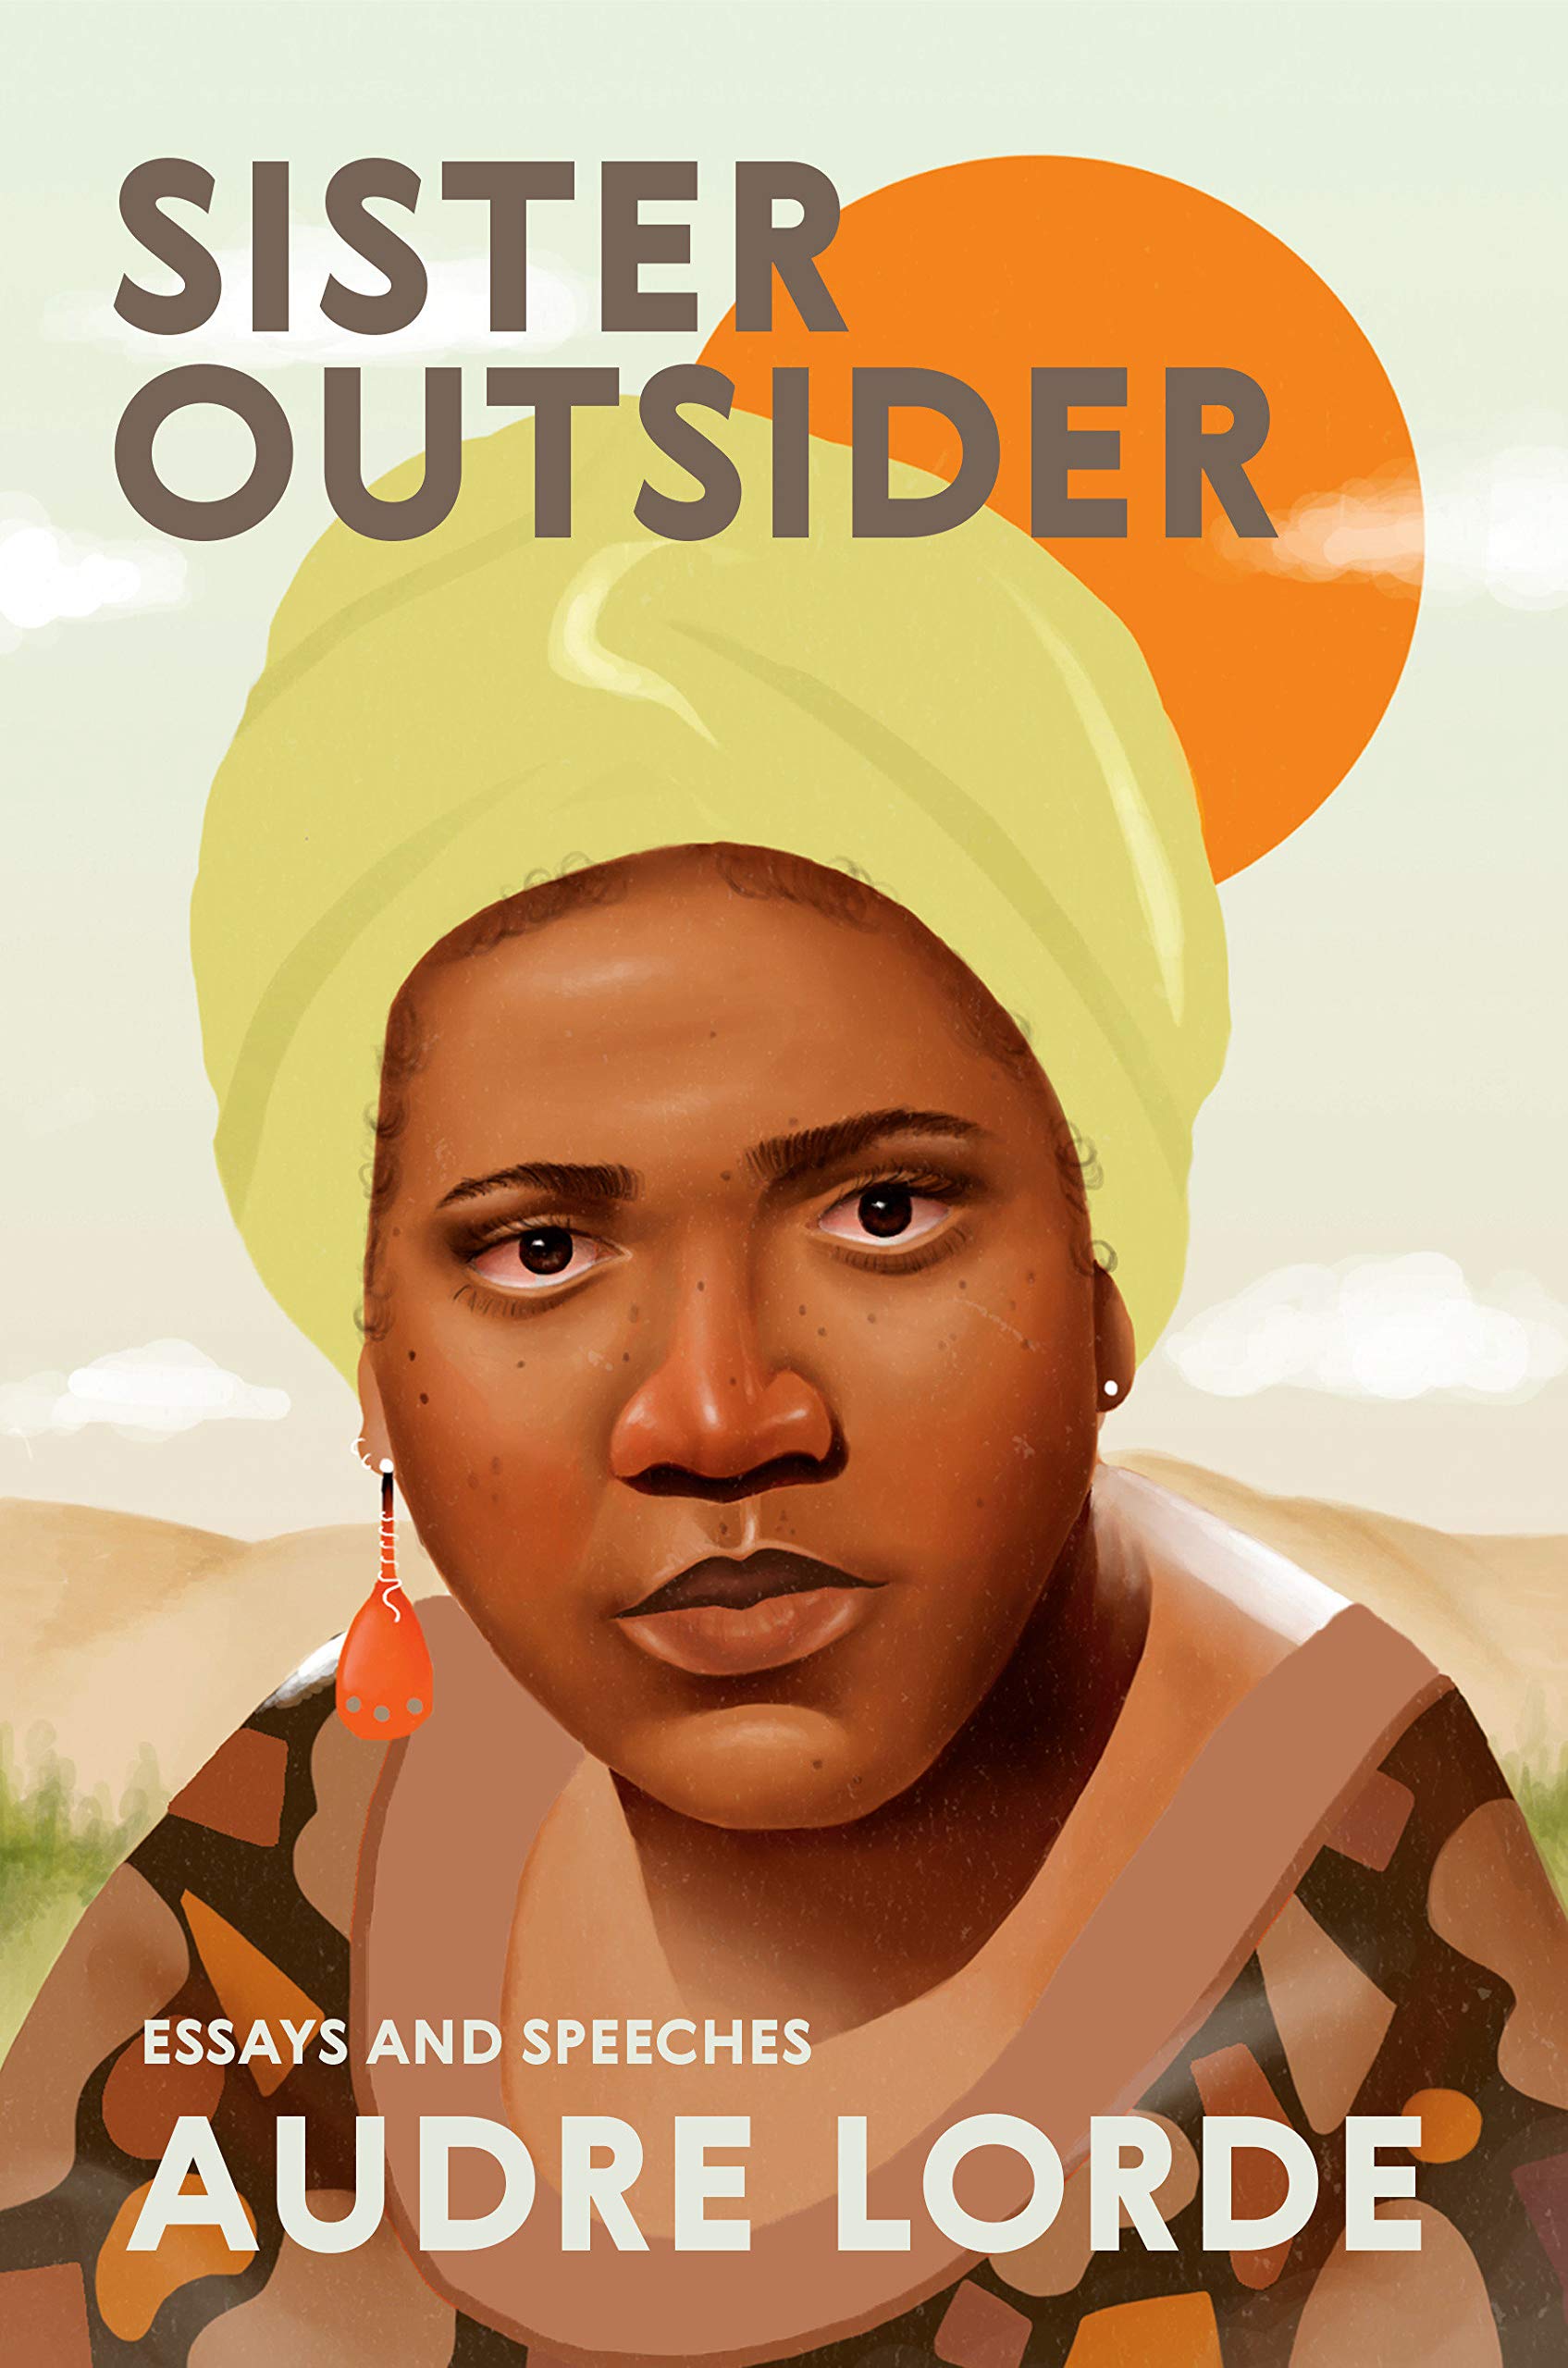 Cover of Sister Outsider done by Crossing Press in 2007, featuring an artistic rendering of Audre Lorde's portrait.